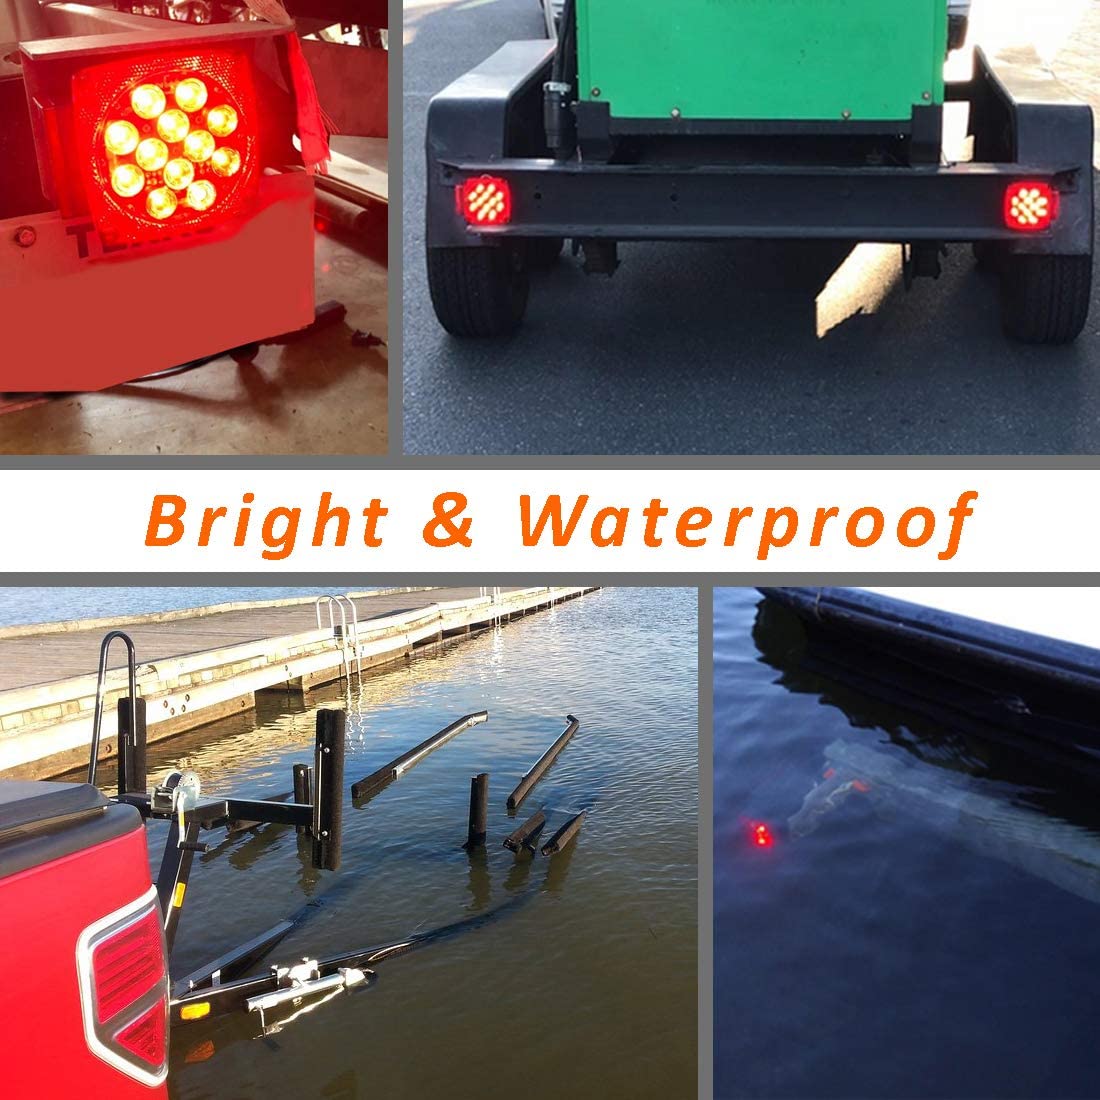 CZC AUTO LED Submersible Trailer Light Kit fits Boat for Under 80 Inch  Trailer 12V